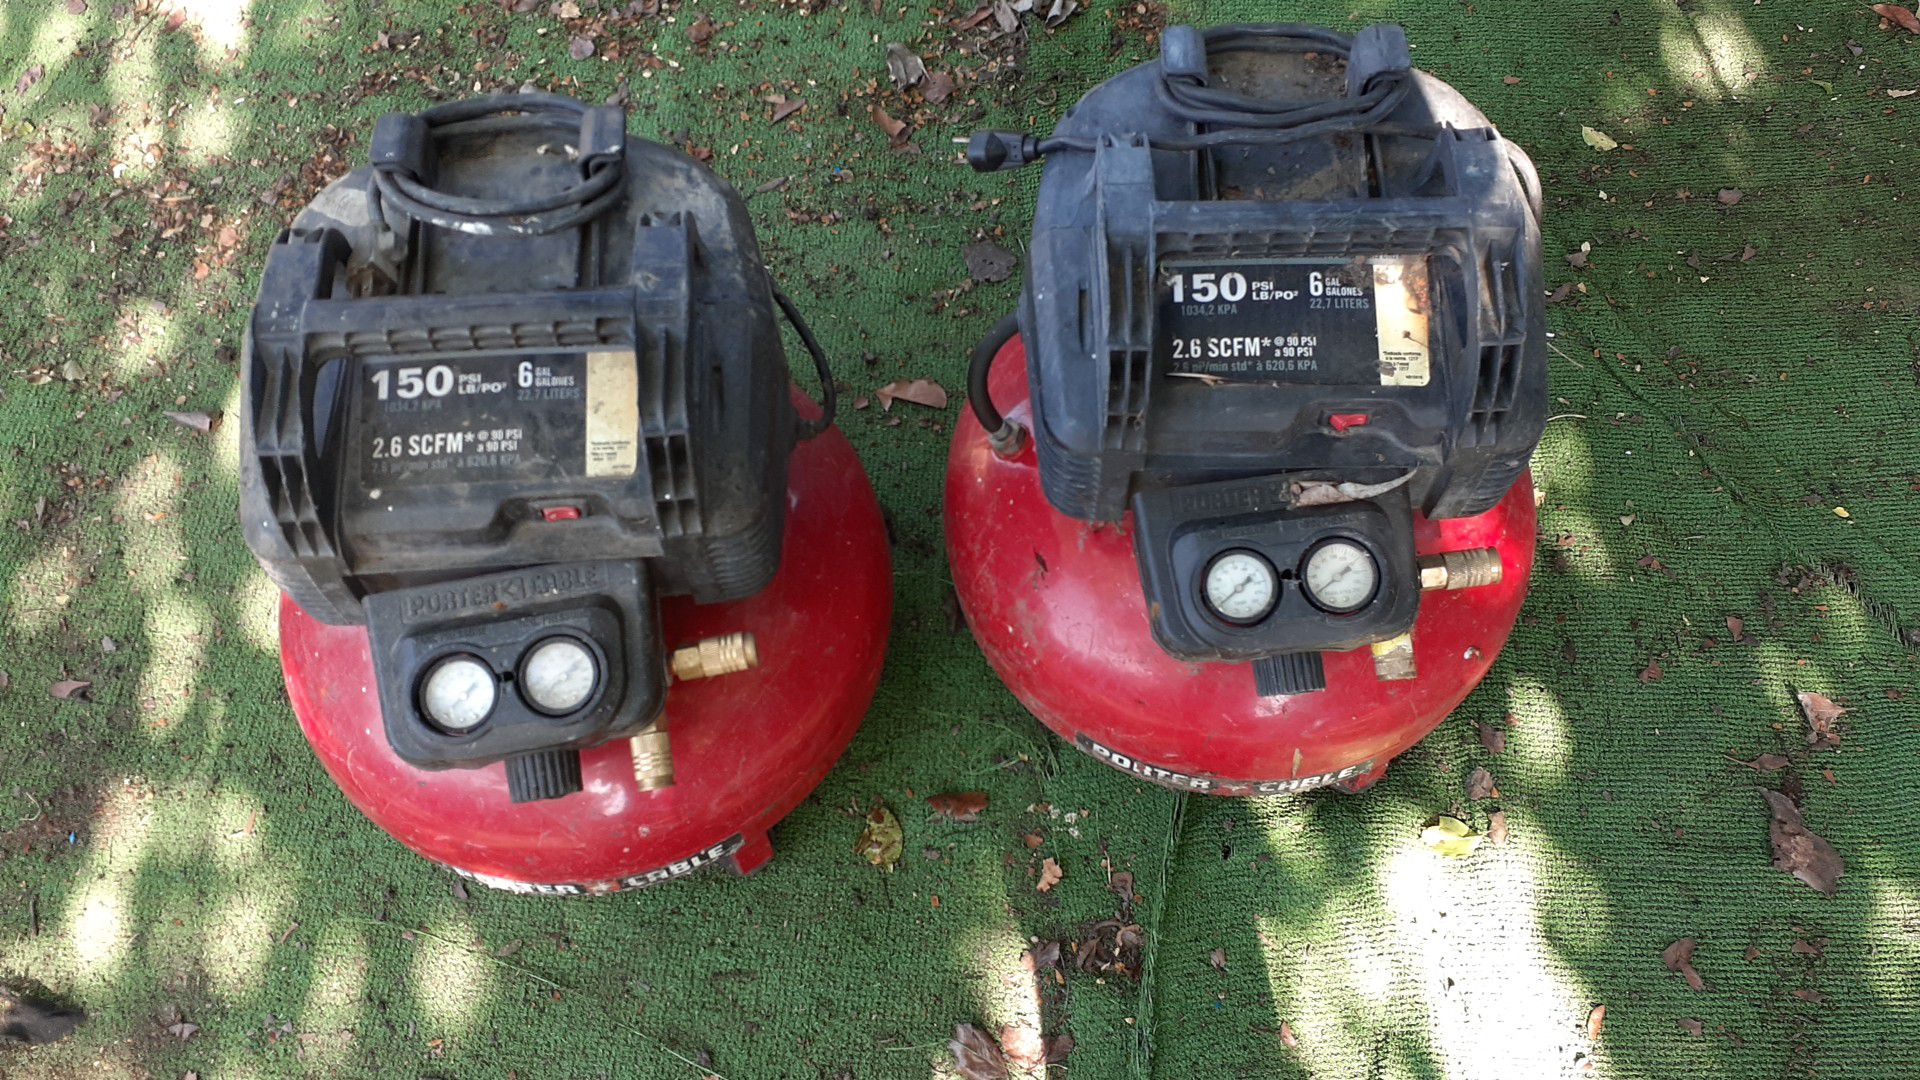 2 compressors for PARTS ONLY!!!! OBO